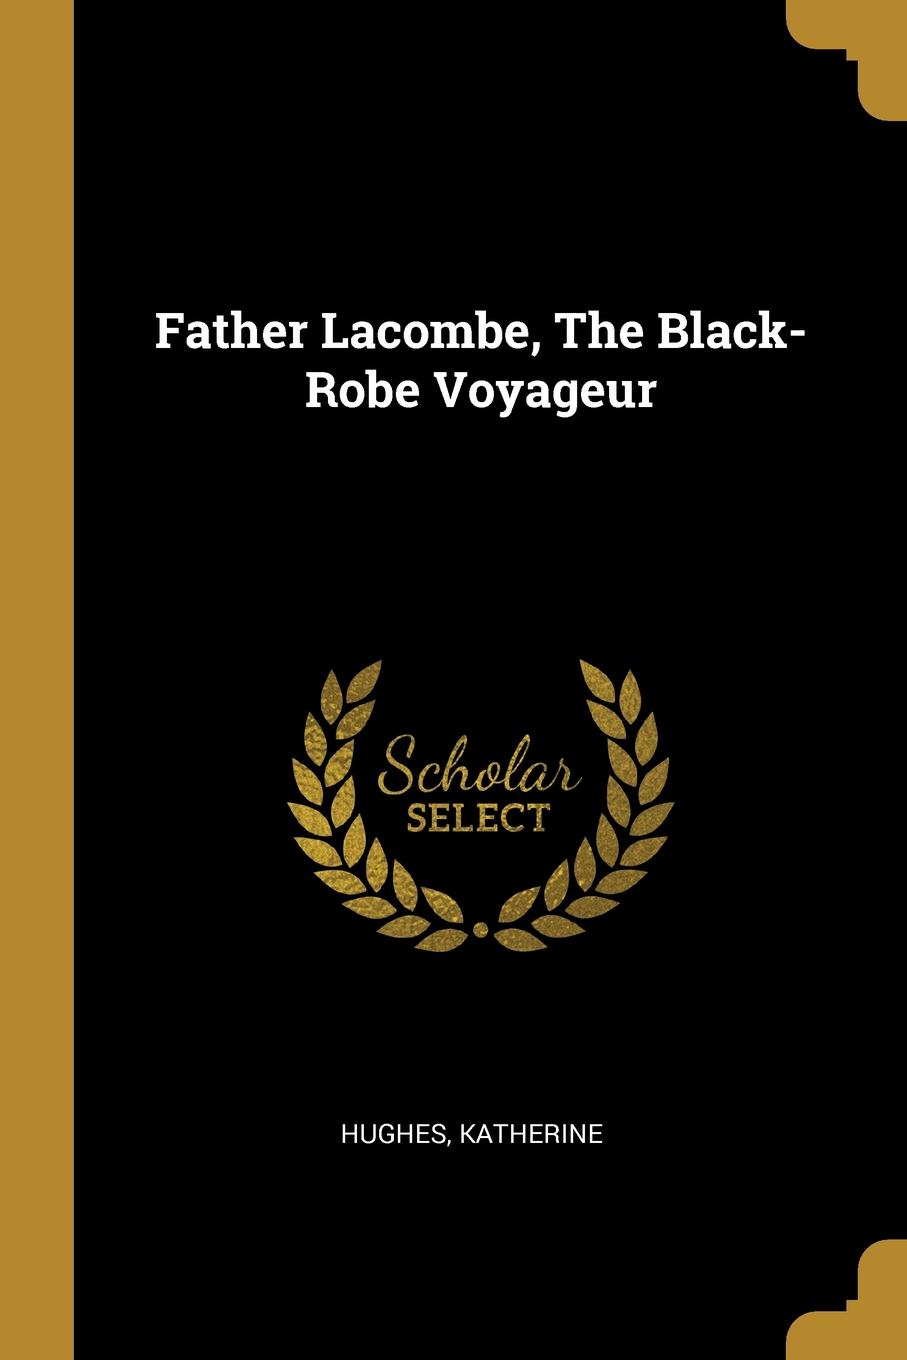 Father Lacombe, The Black-Robe Voyageur